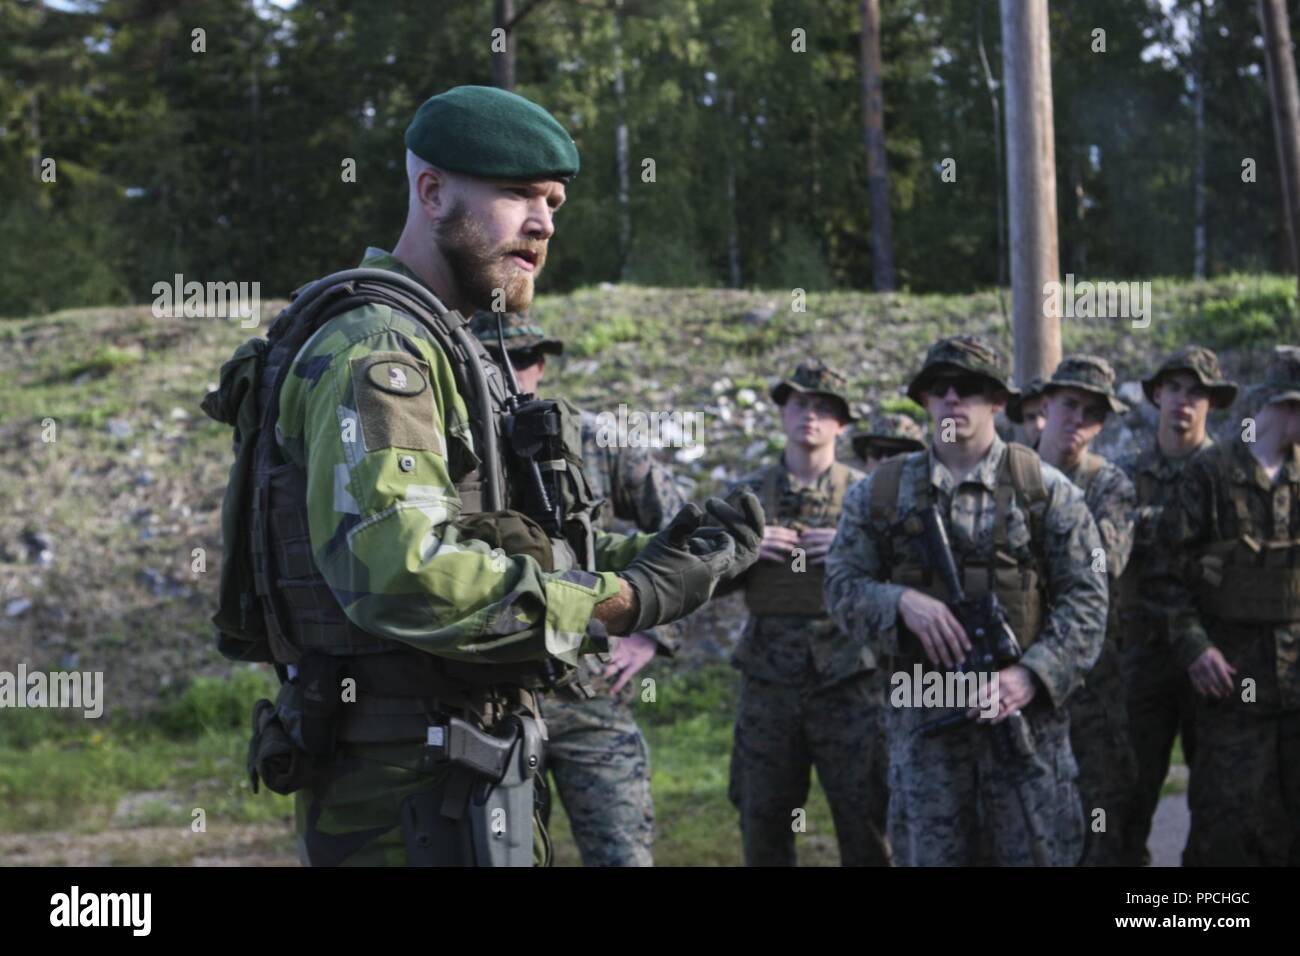 A Swedish Coastal Ranger with 1st Marine Regiment gives a range safety brief during Exercise Archipelago Endeavor aboard Berga Naval Base, Harsfjarden, Sweden, Aug. 22, 2018. Exercise Archipelago Endeavor is an integrated field training exercise that increases operational capability and enhances strategic cooperation between the U.S. Marines and Swedish forces. Stock Photo